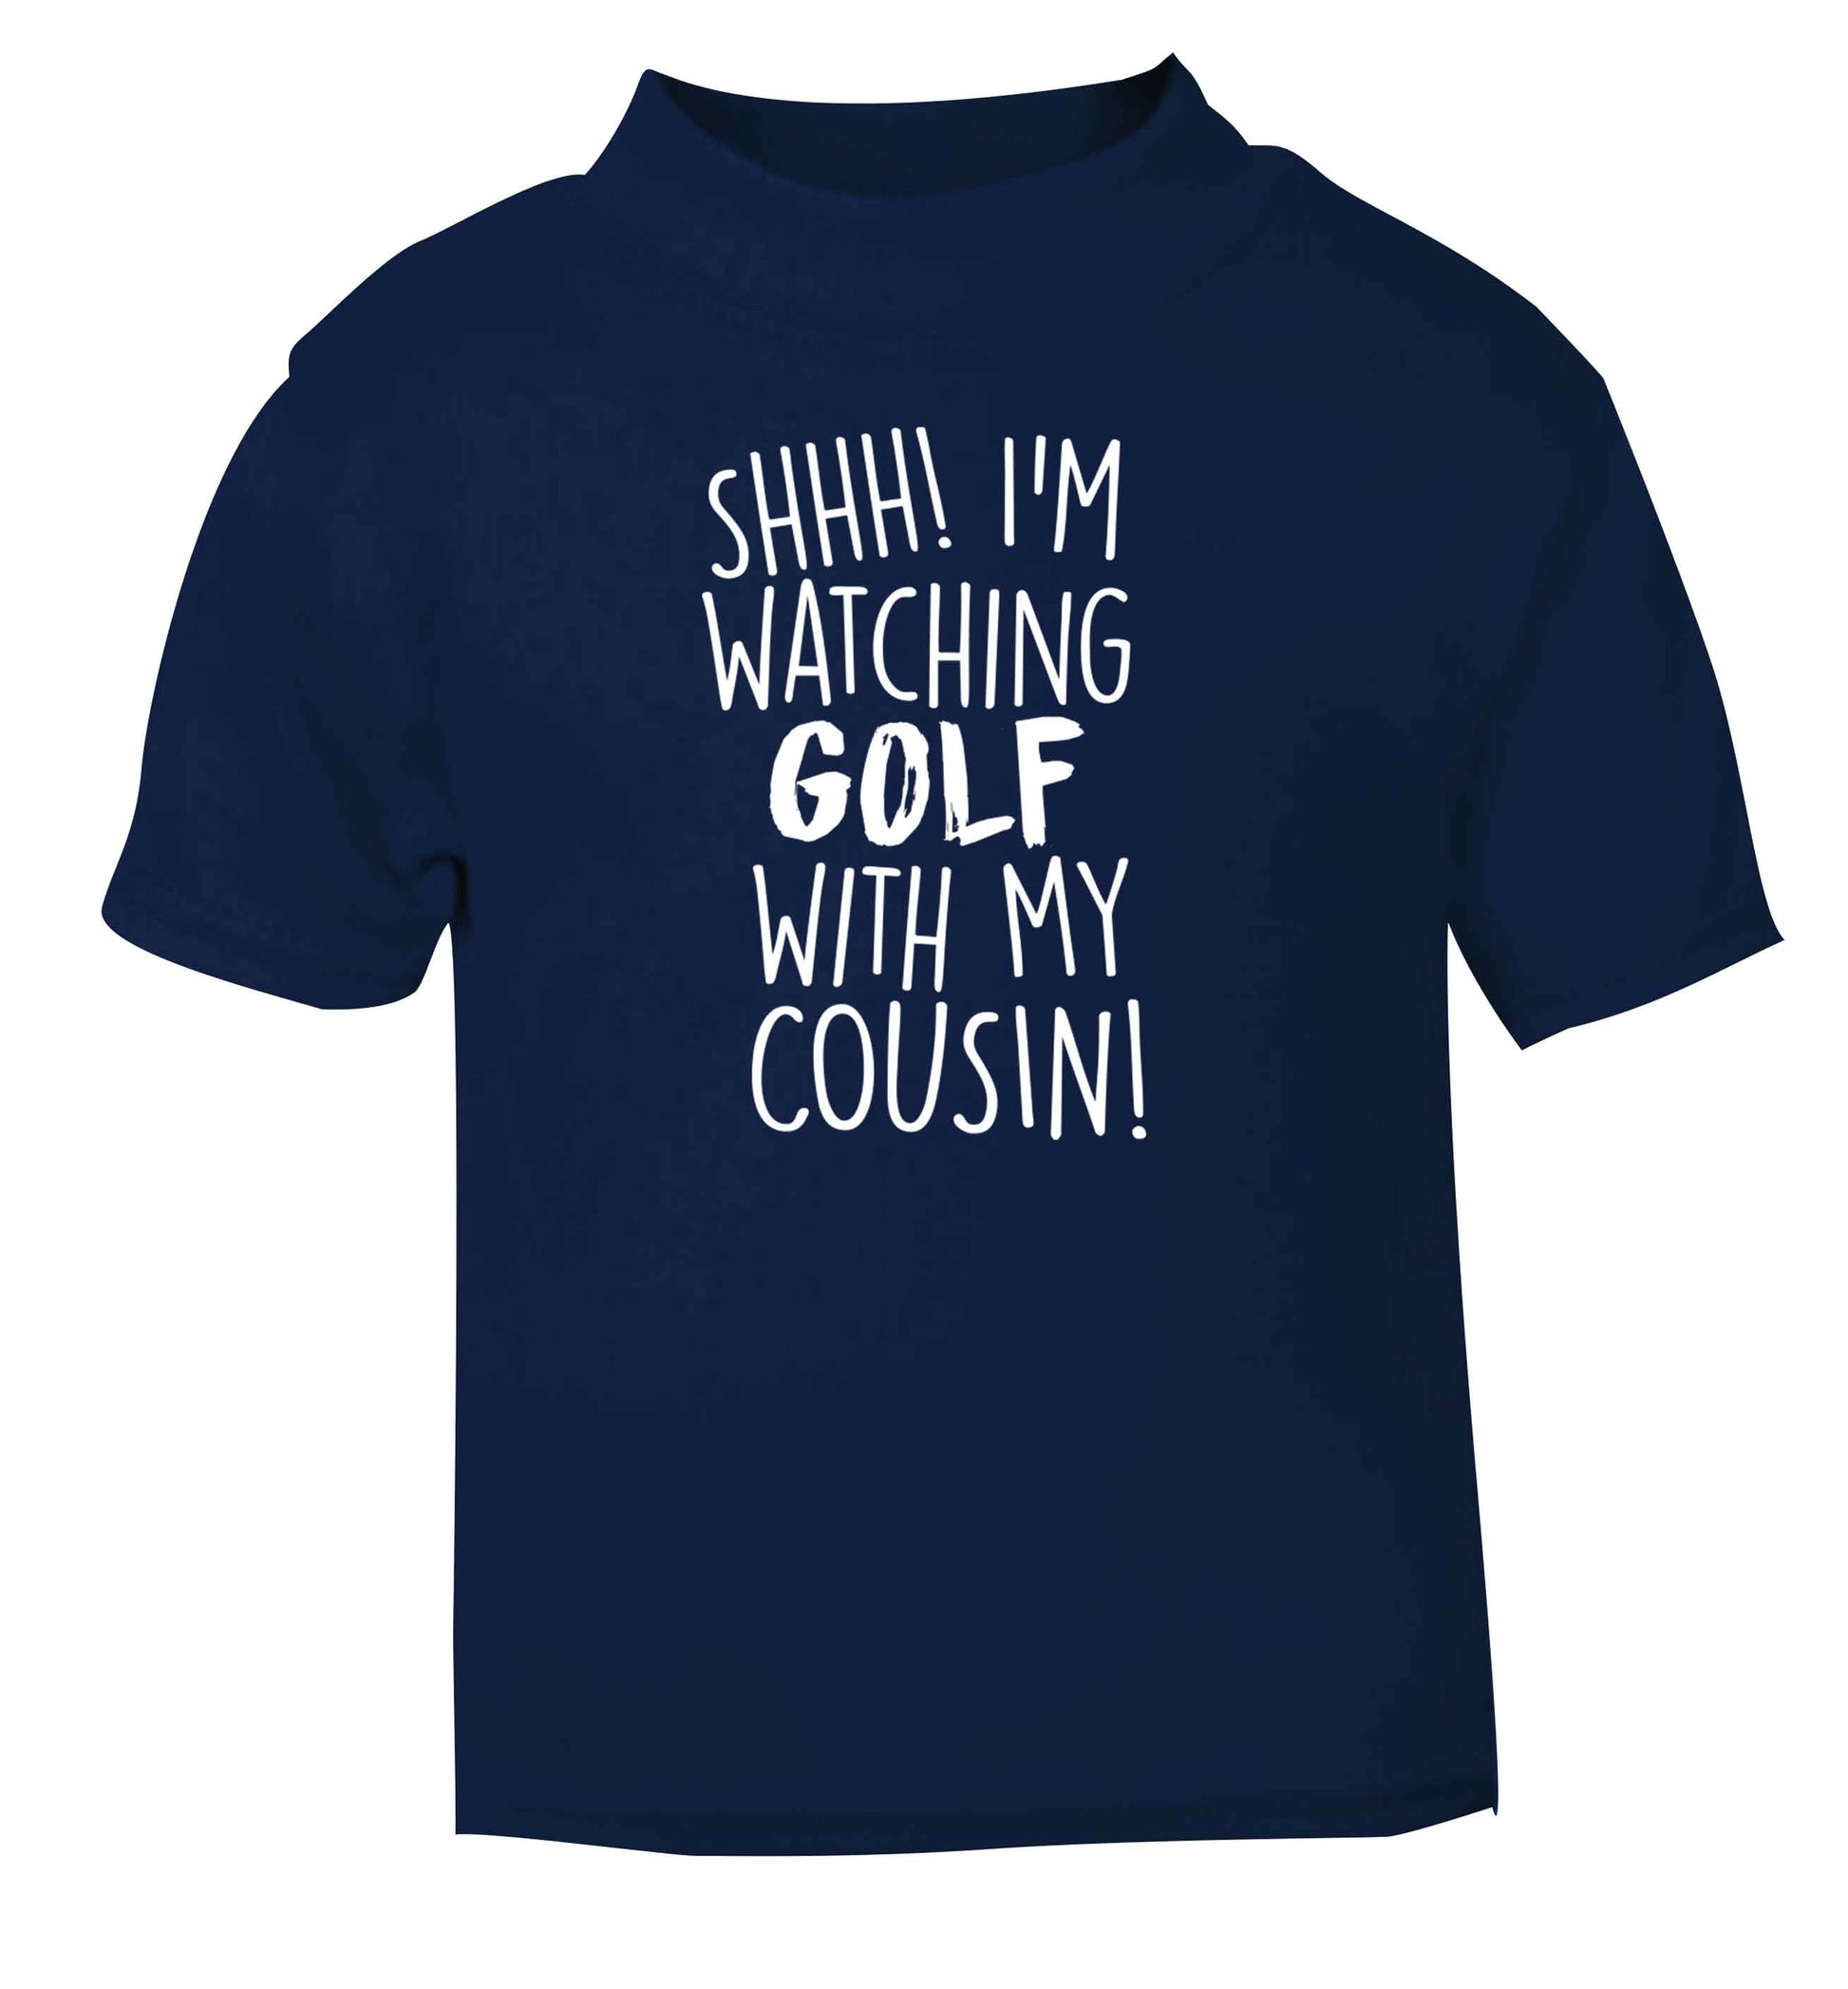 Shh I'm watching golf with my cousin navy Baby Toddler Tshirt 2 Years